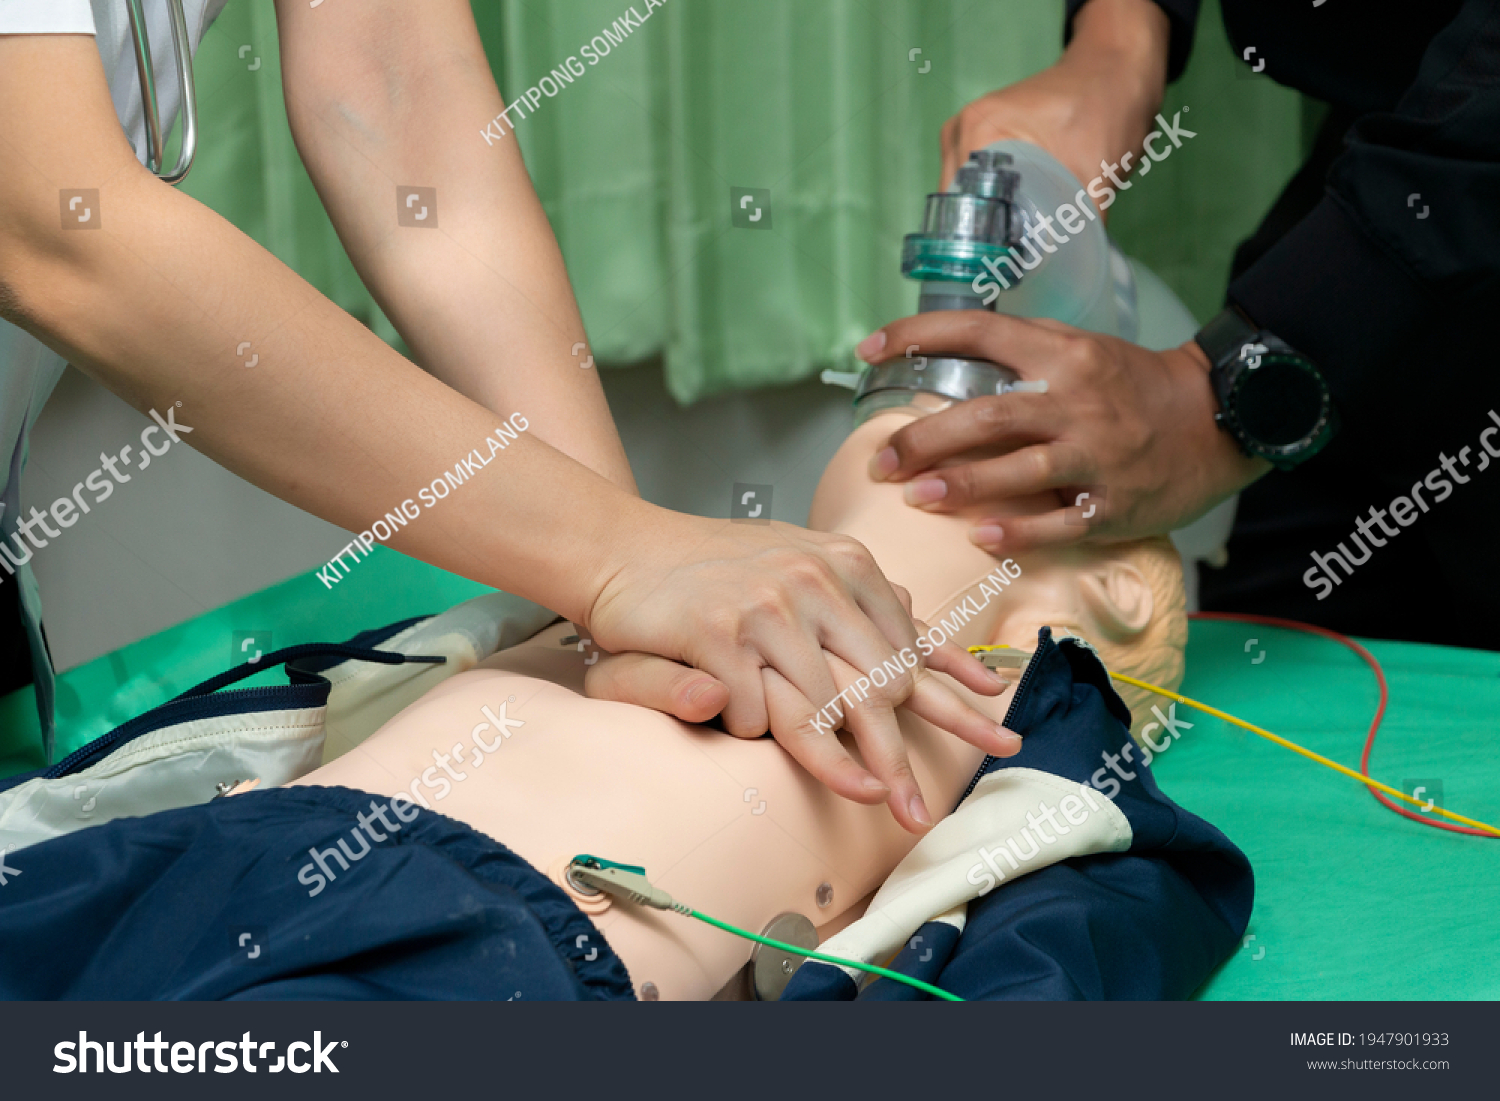 the skills trainer for adult airway management trainer,
realistic practice is the key to developing proficiency in airway management #1947901933